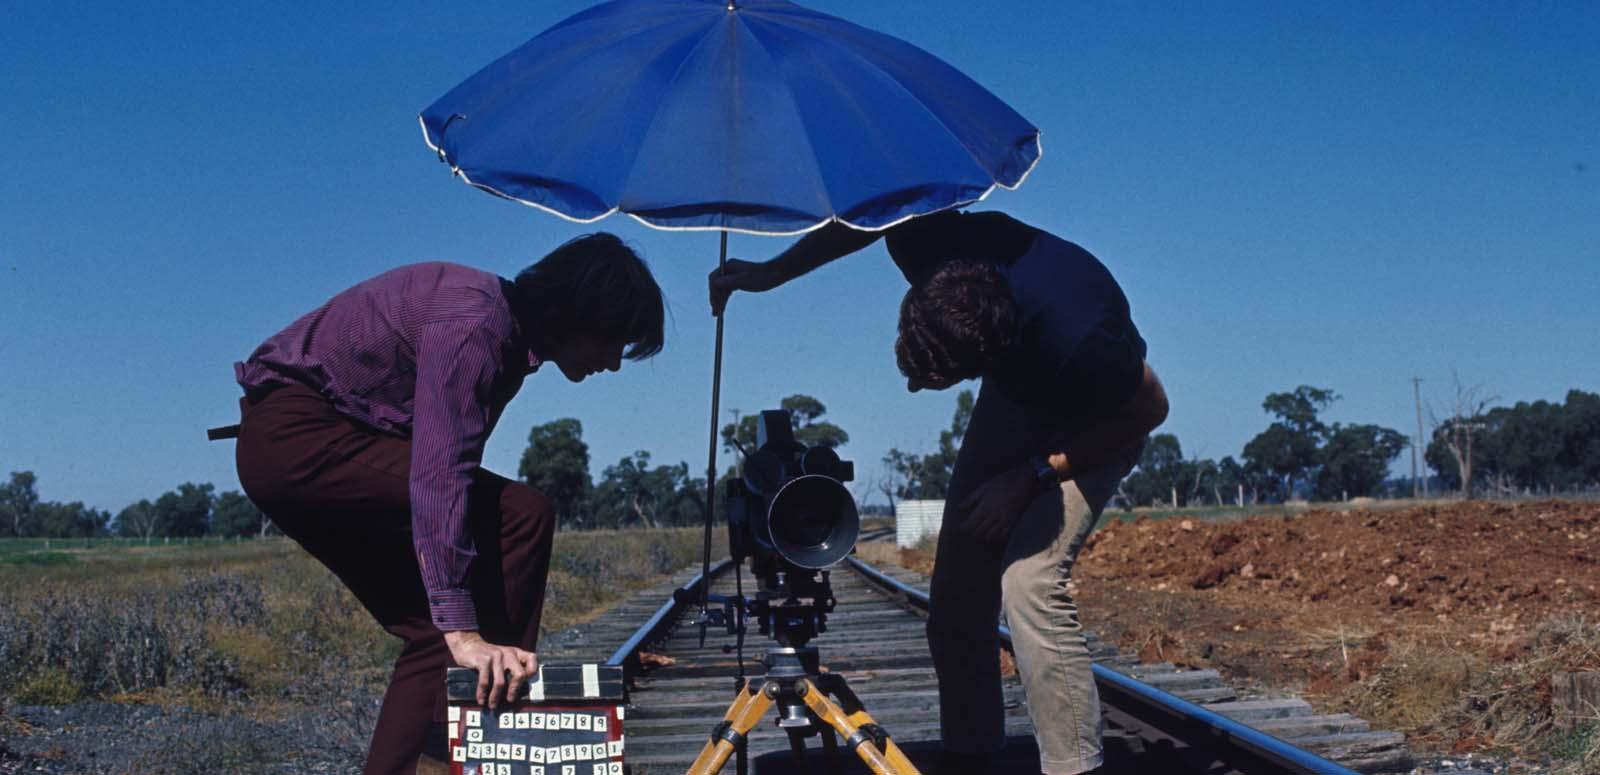 A man holds an umbrella over a film camera positioned on railway tracks while another man holds a clapperboard